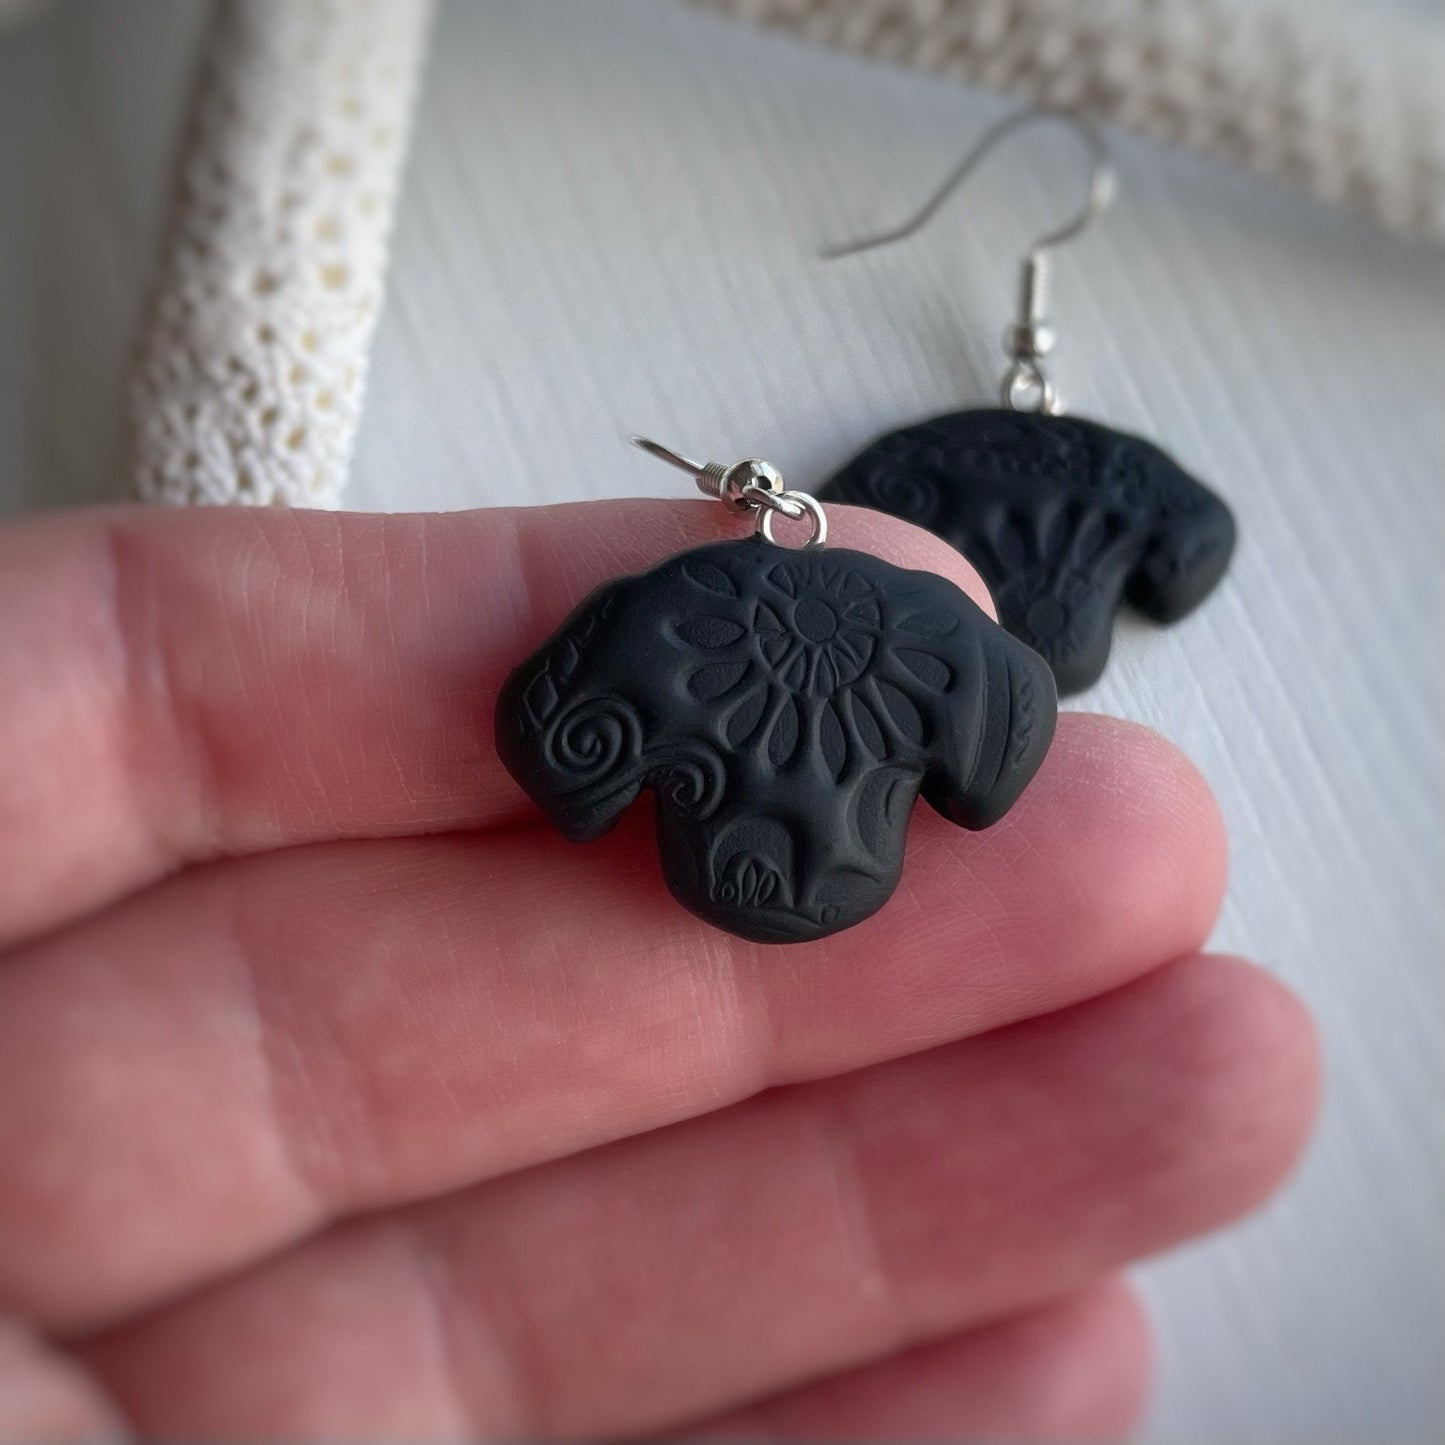 Black Dog Earrings with Abstract Impression | IWC Earrings